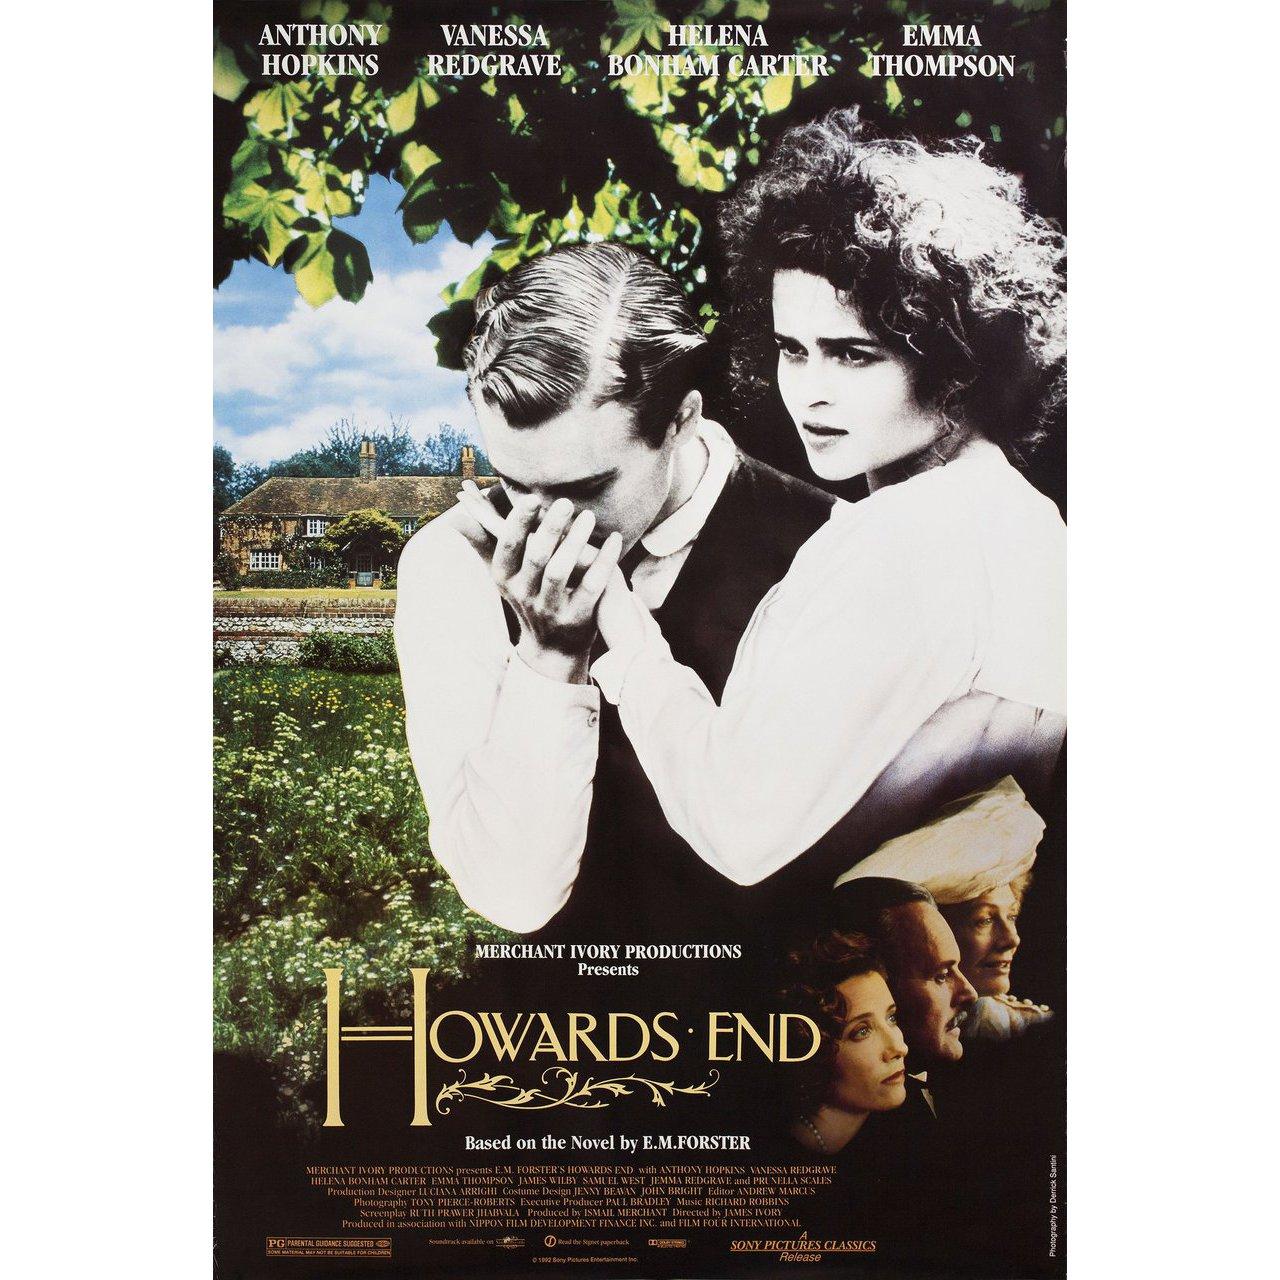 Original 1992 U.S. one sheet poster for the film 'Howards End' directed by James Ivory with Vanessa Redgrave / Helena Bonham Carter / Joseph Bennett / Emma Thompson. Very good-fine condition, rolled. Please note: the size is stated in inches and the